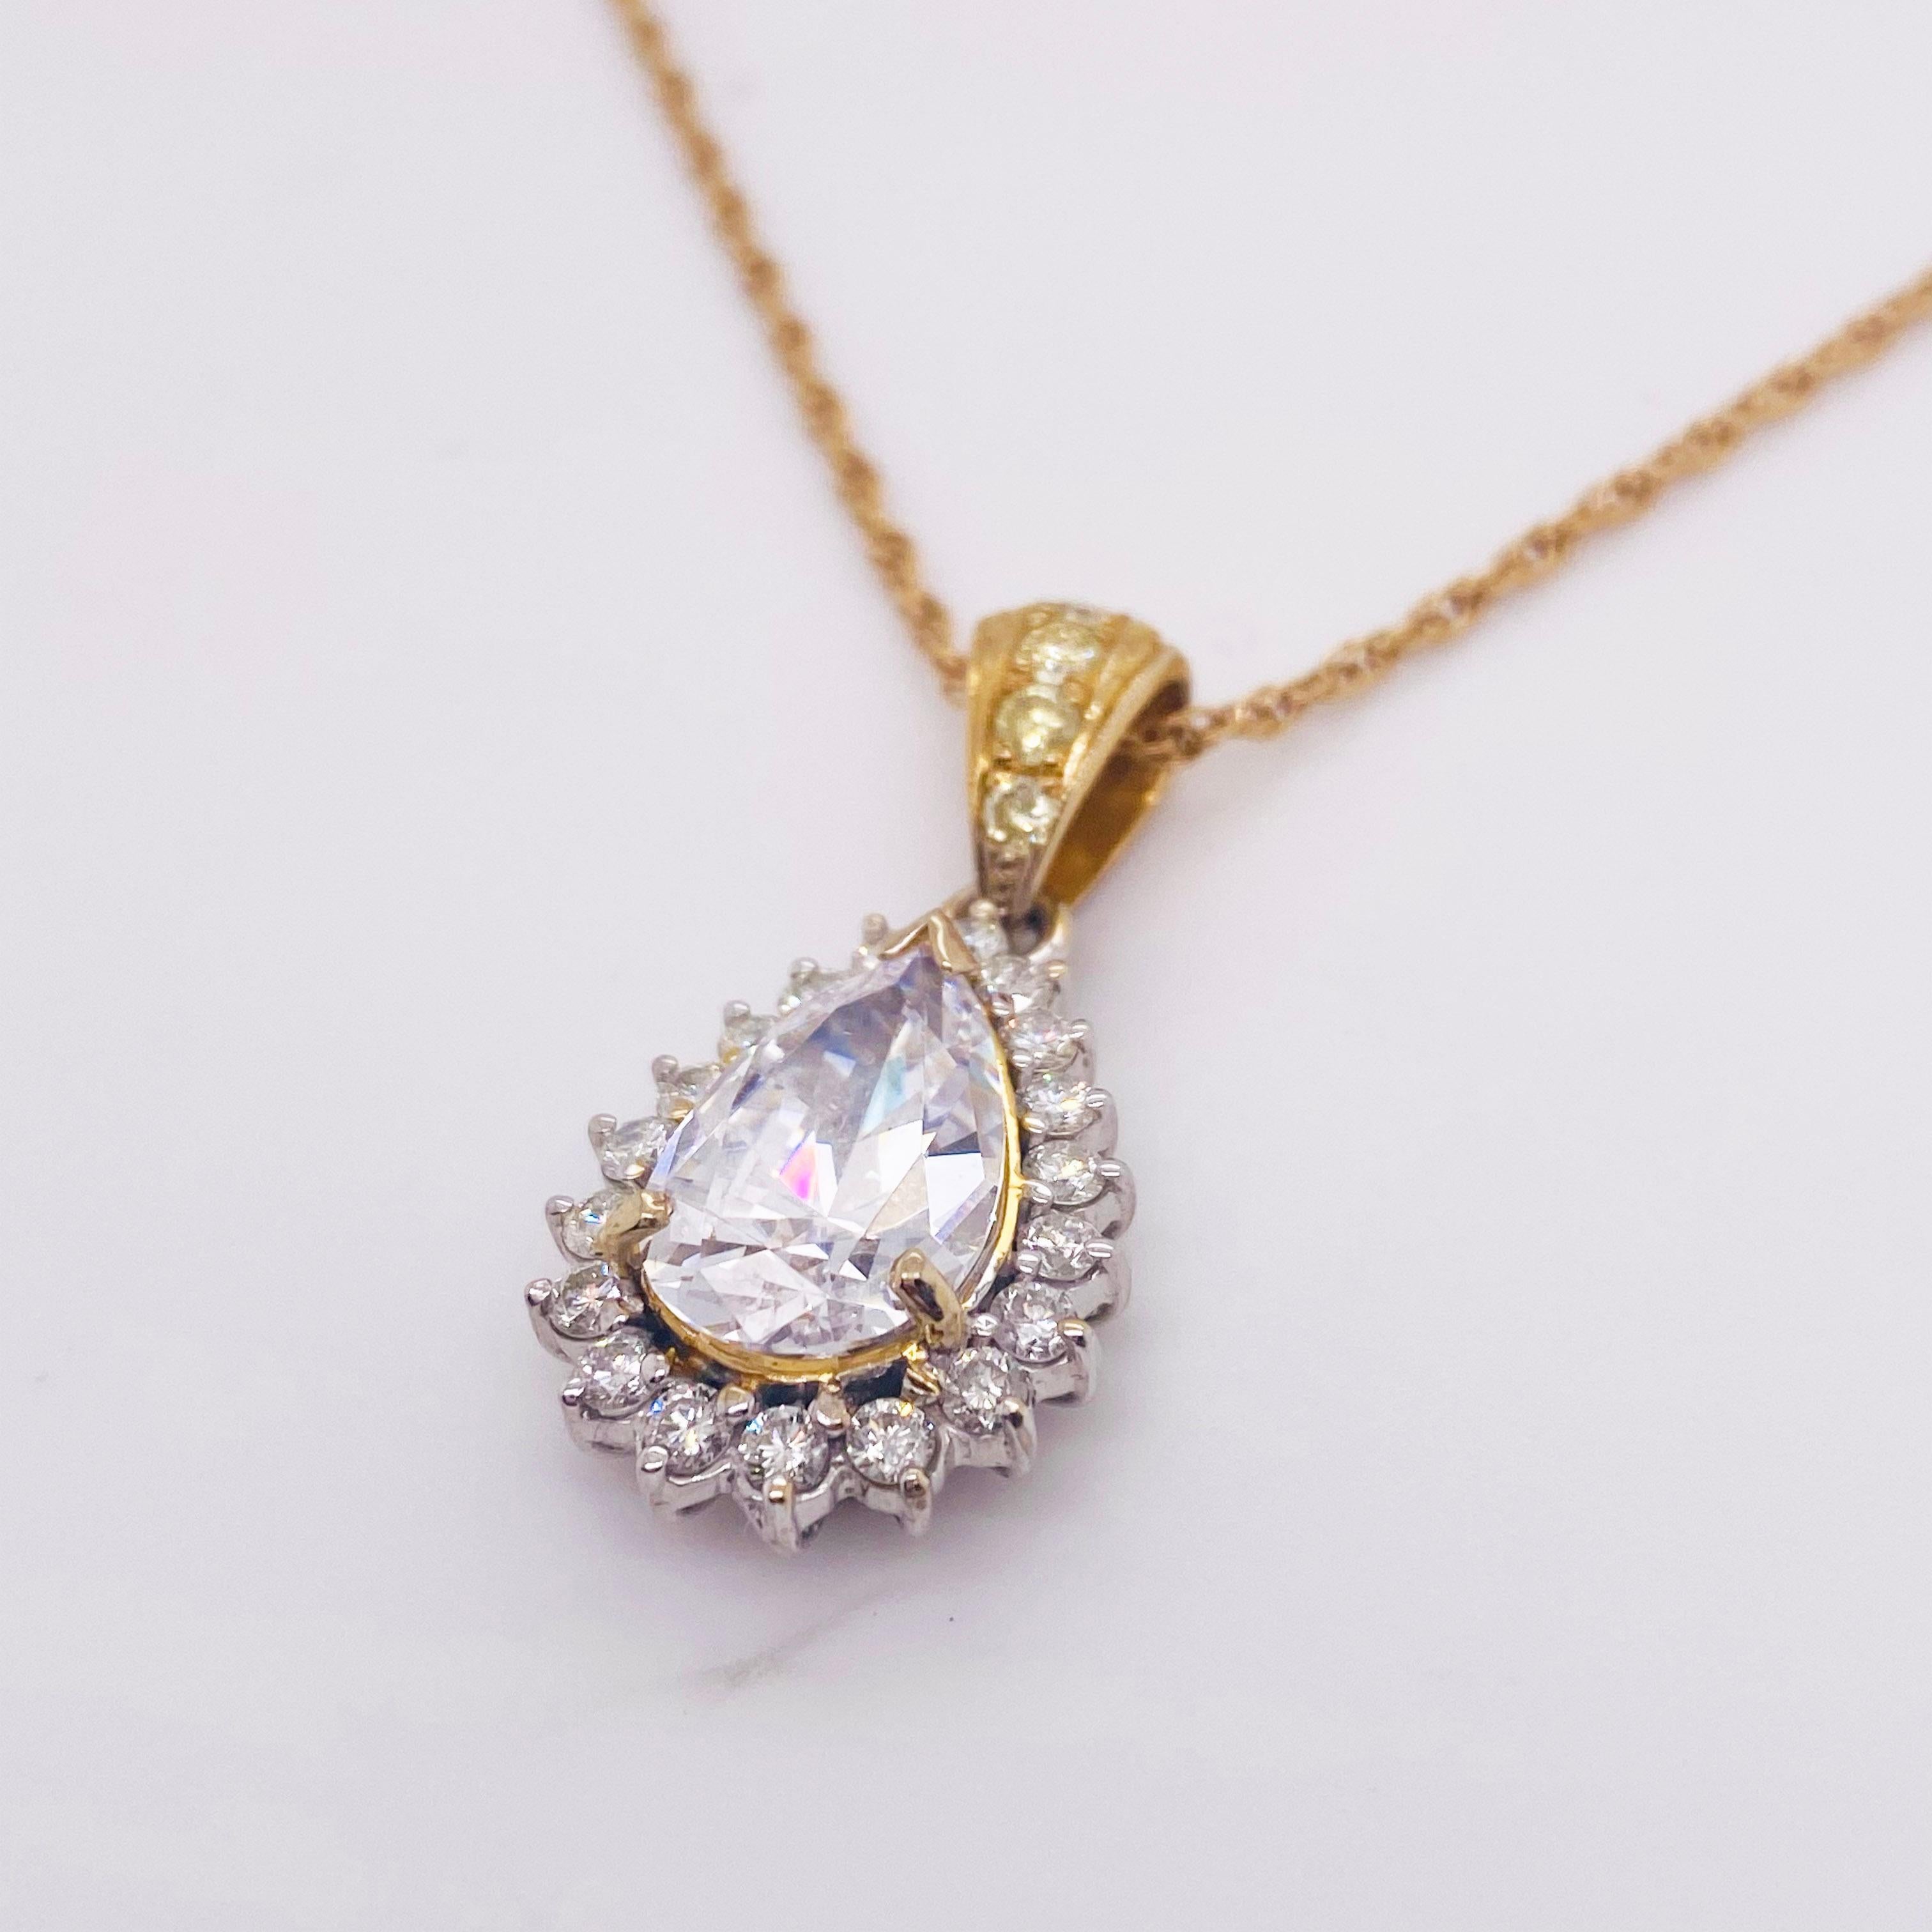 This STUNNING diamond pendant has a gorgeous diamond halo setting. It is delicately hanging from an 18K yellow gold rope chain that complements the gold in the pendant. This piece will bring a fine elegance to any look. The diamonds around the halo